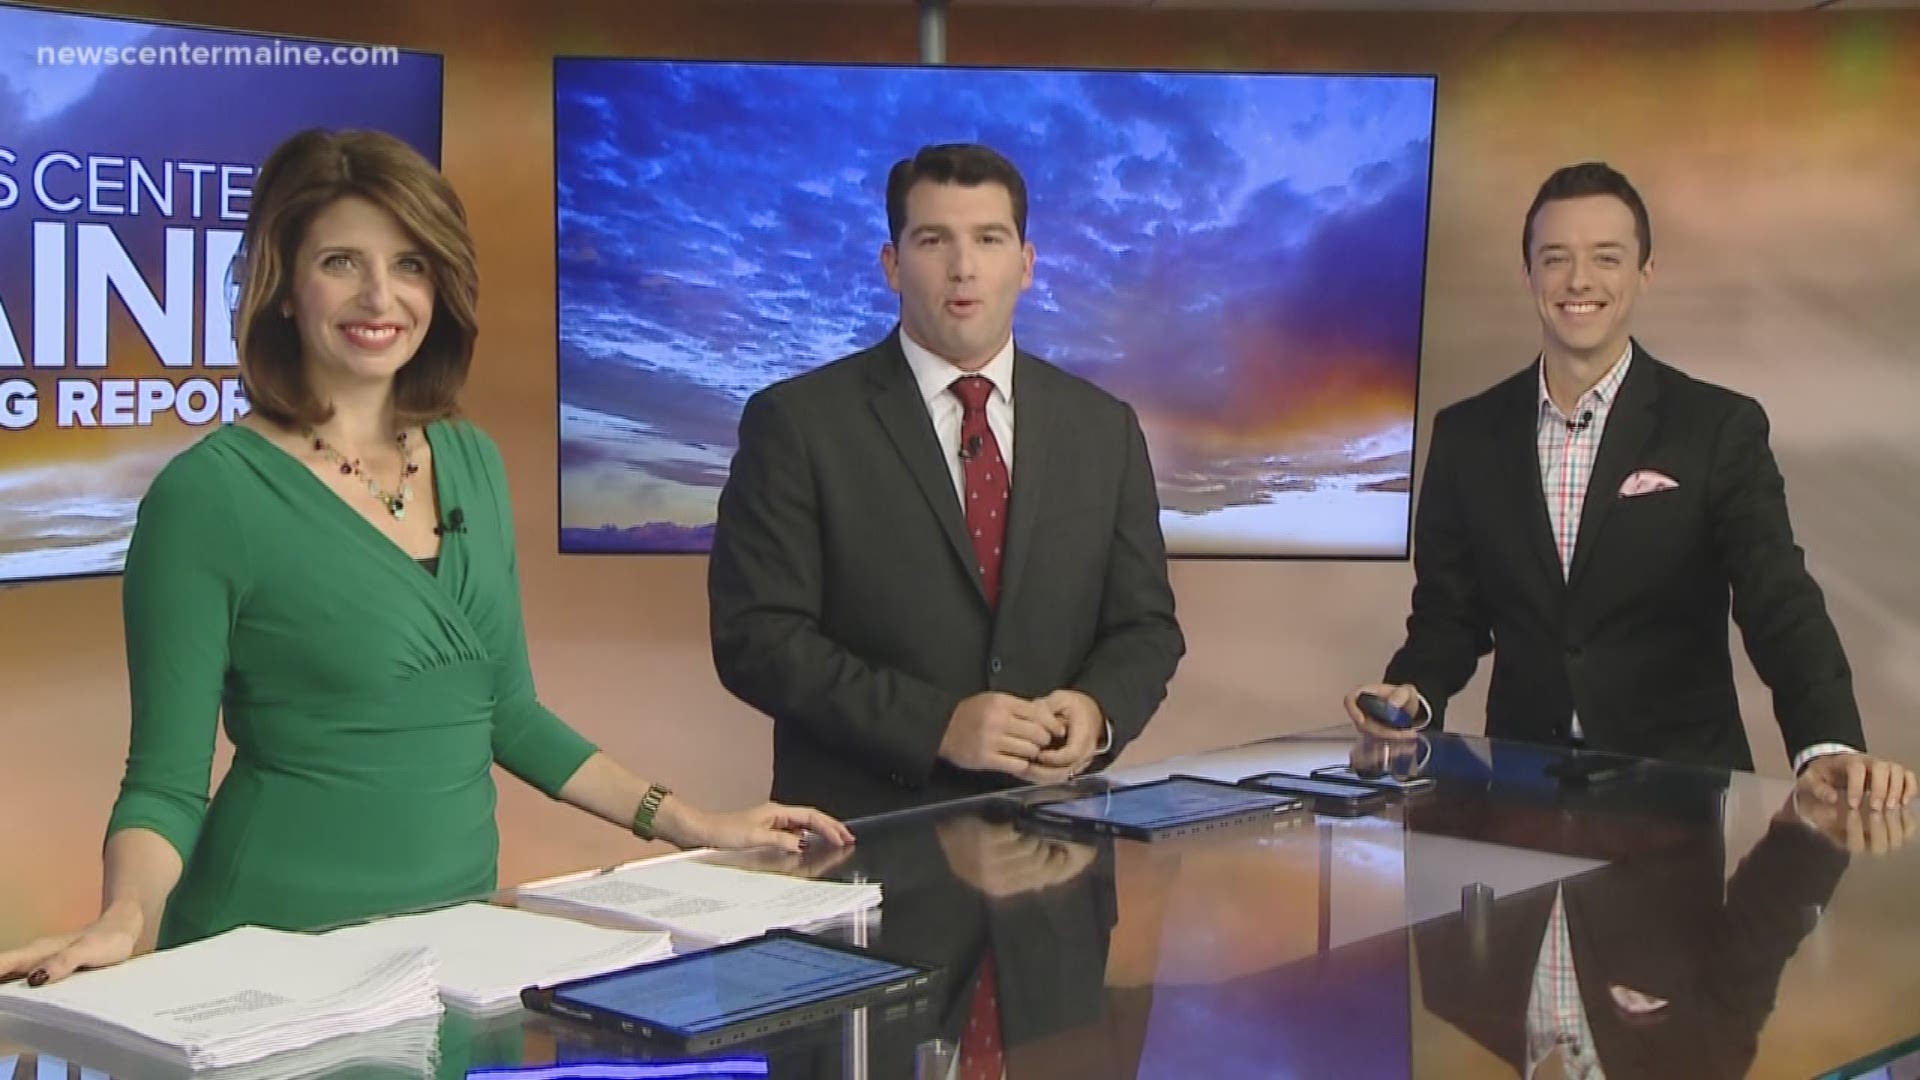 Veteran anchor Adrienne Stein's debut on the weekend Morning Report.